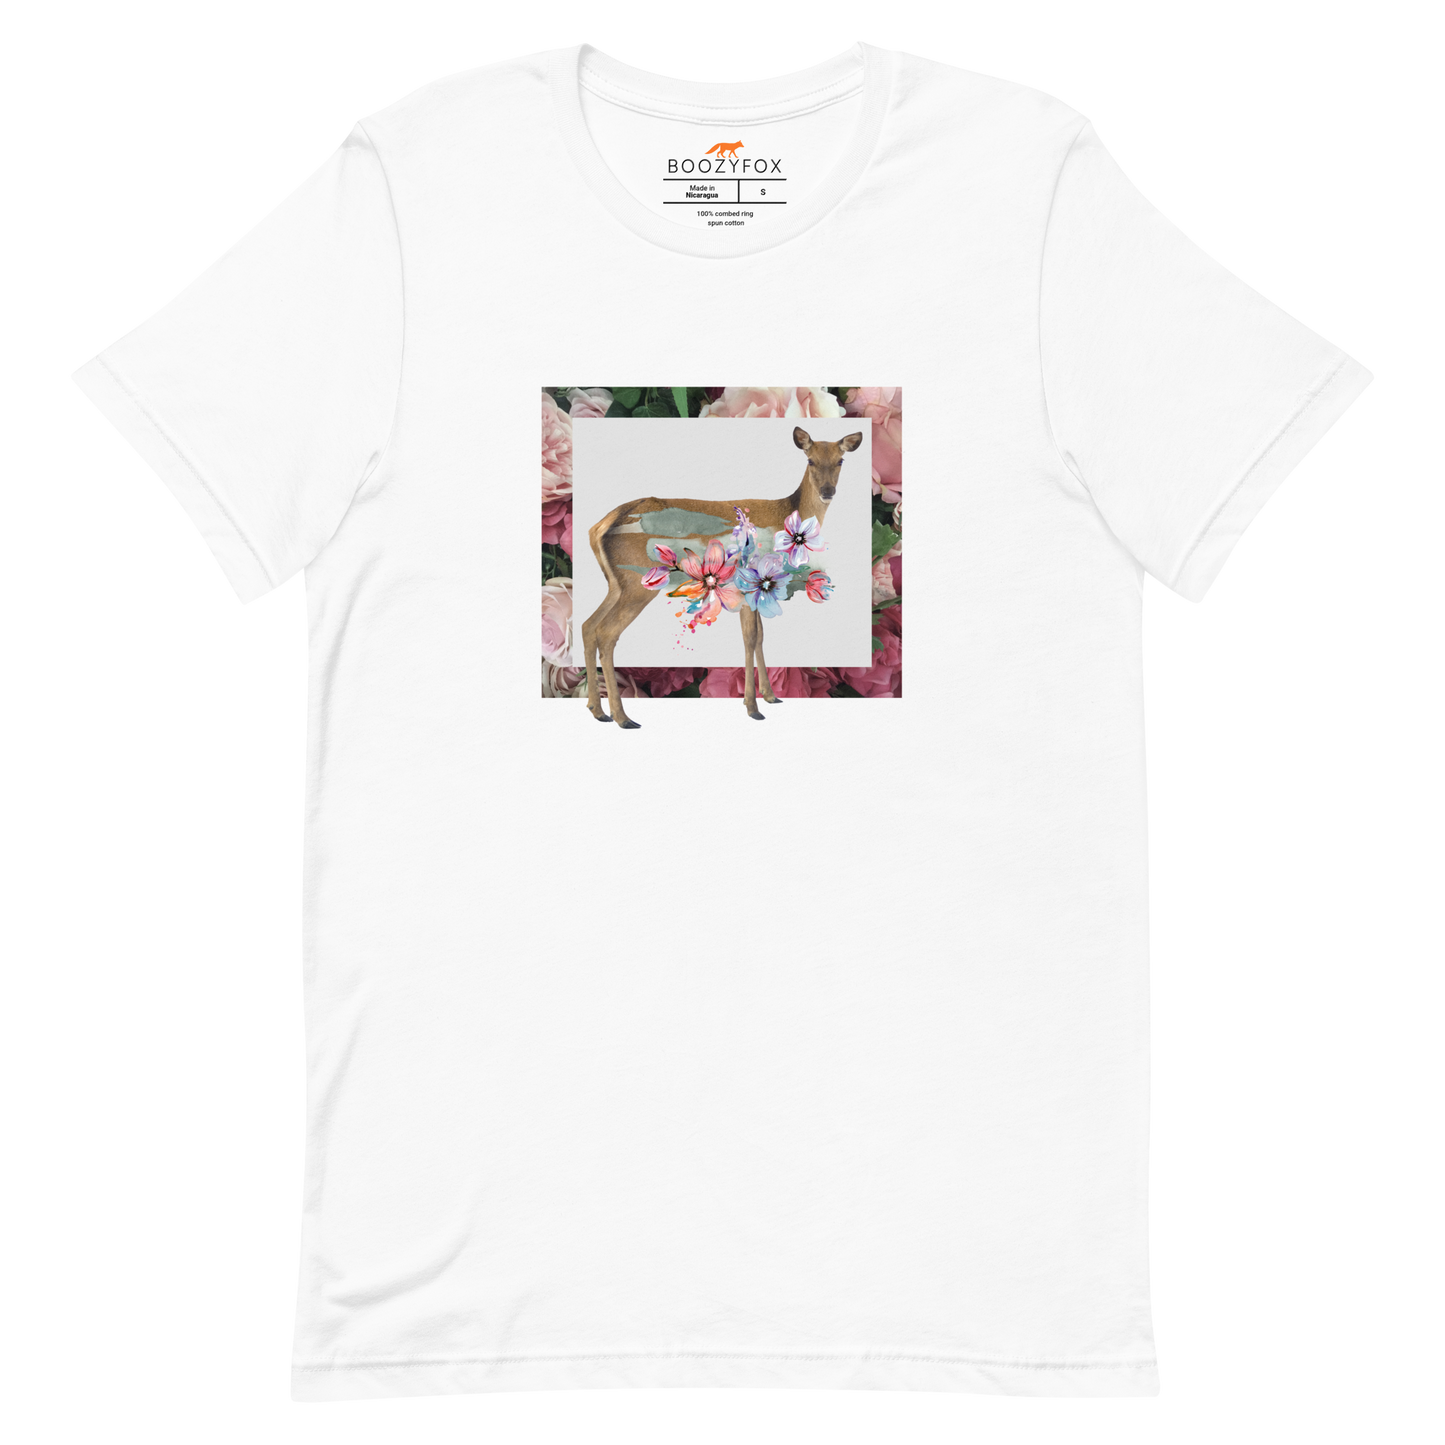 White Premium Deer T-Shirt featuring a stunning Floral Deer graphic on the chest - Cute Graphic Deer Tees - Boozy Fox